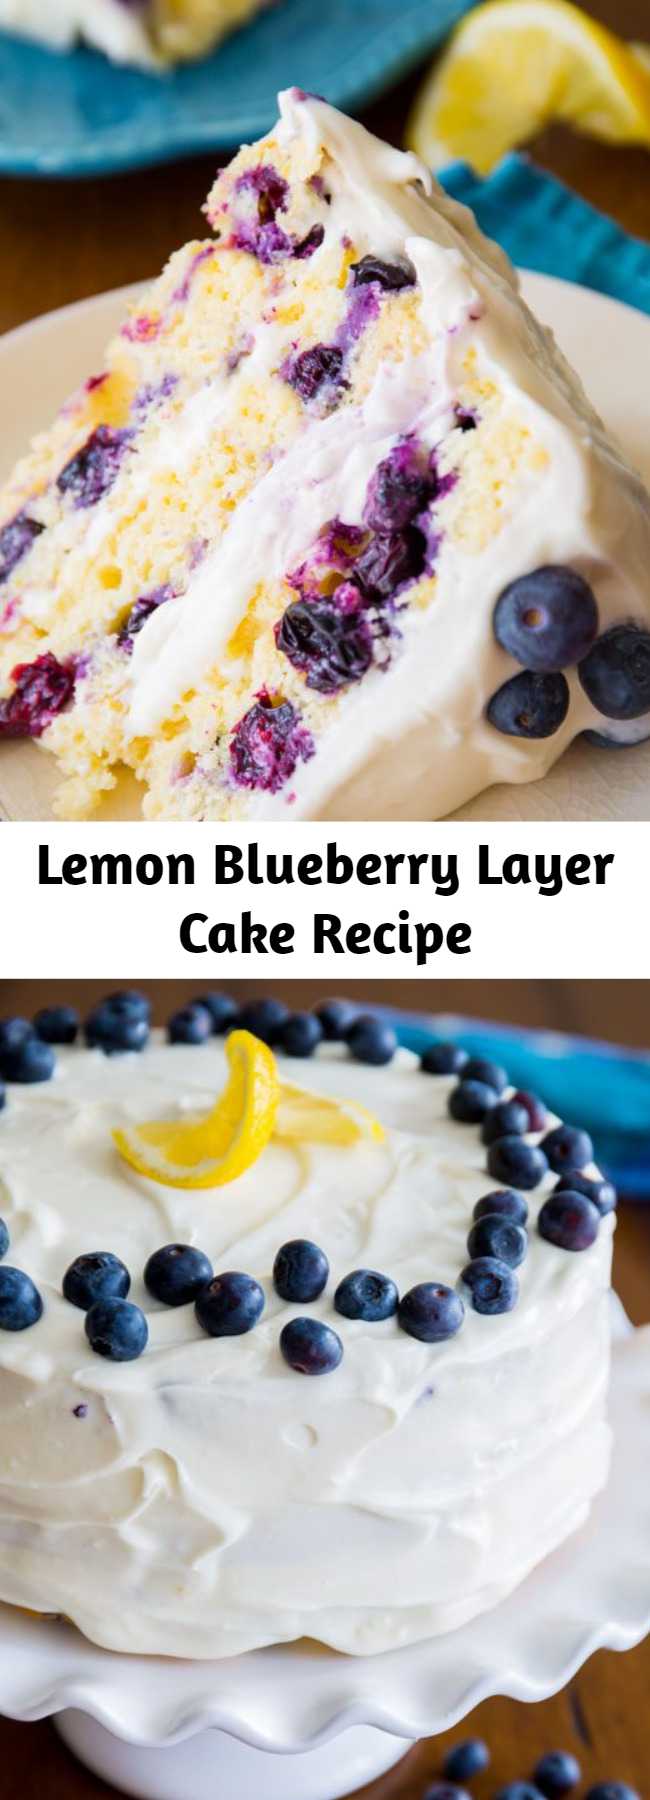 Lemon Blueberry Layer Cake Recipe - Sunshine-sweet lemon layer cake dotted with juicy blueberries and topped with lush cream cheese frosting. You can use either fresh or frozen blueberries in this cake. If using frozen, no need to thaw.